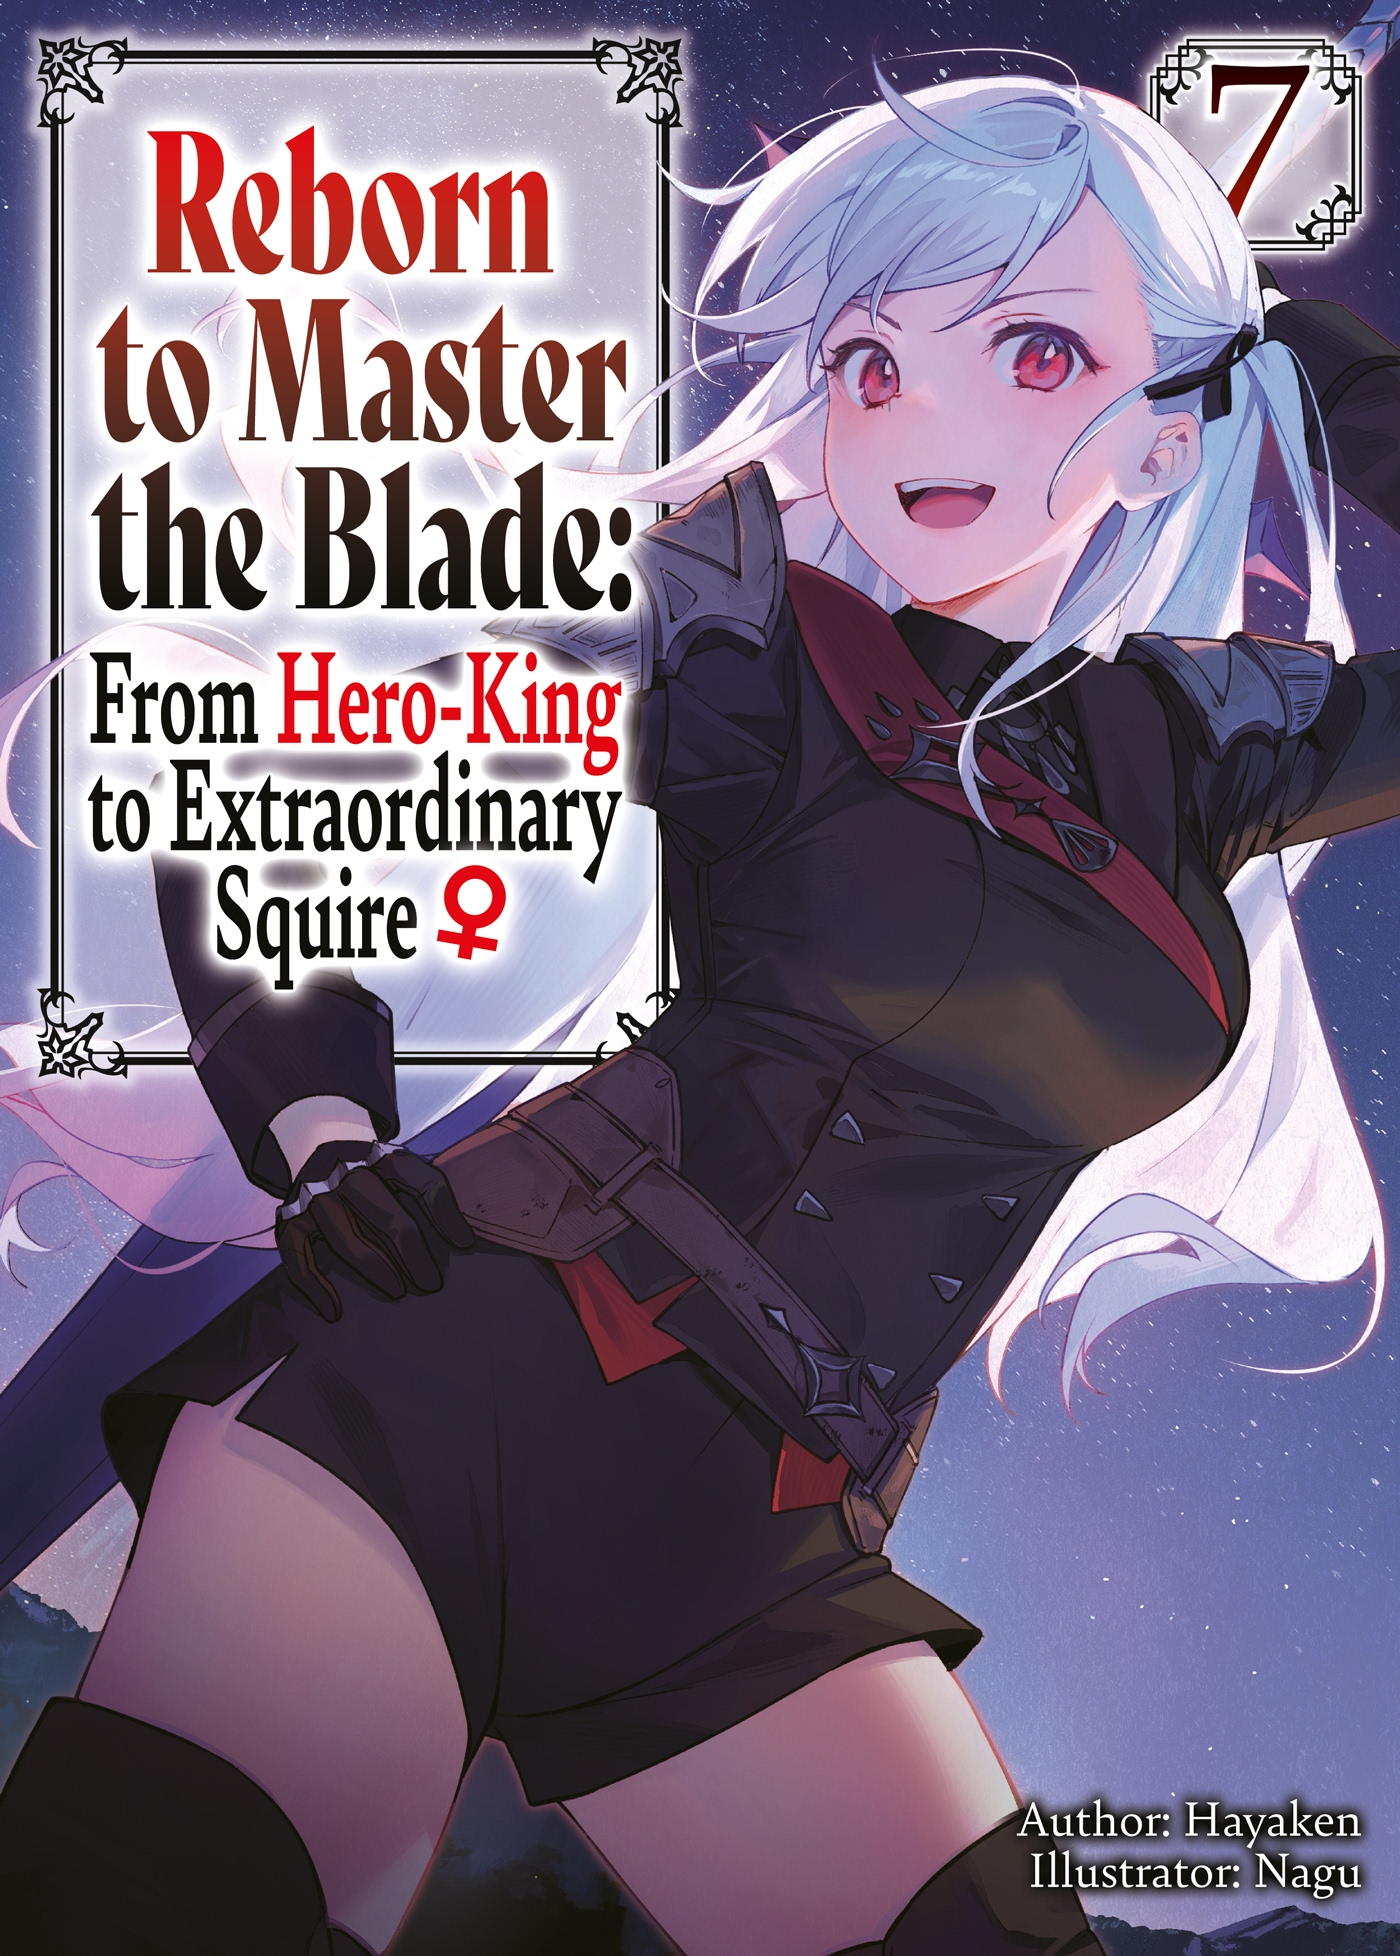 Reborn to Master the Blade: From Hero-King to Extraordinary Squire ♀  Episode 2 Review